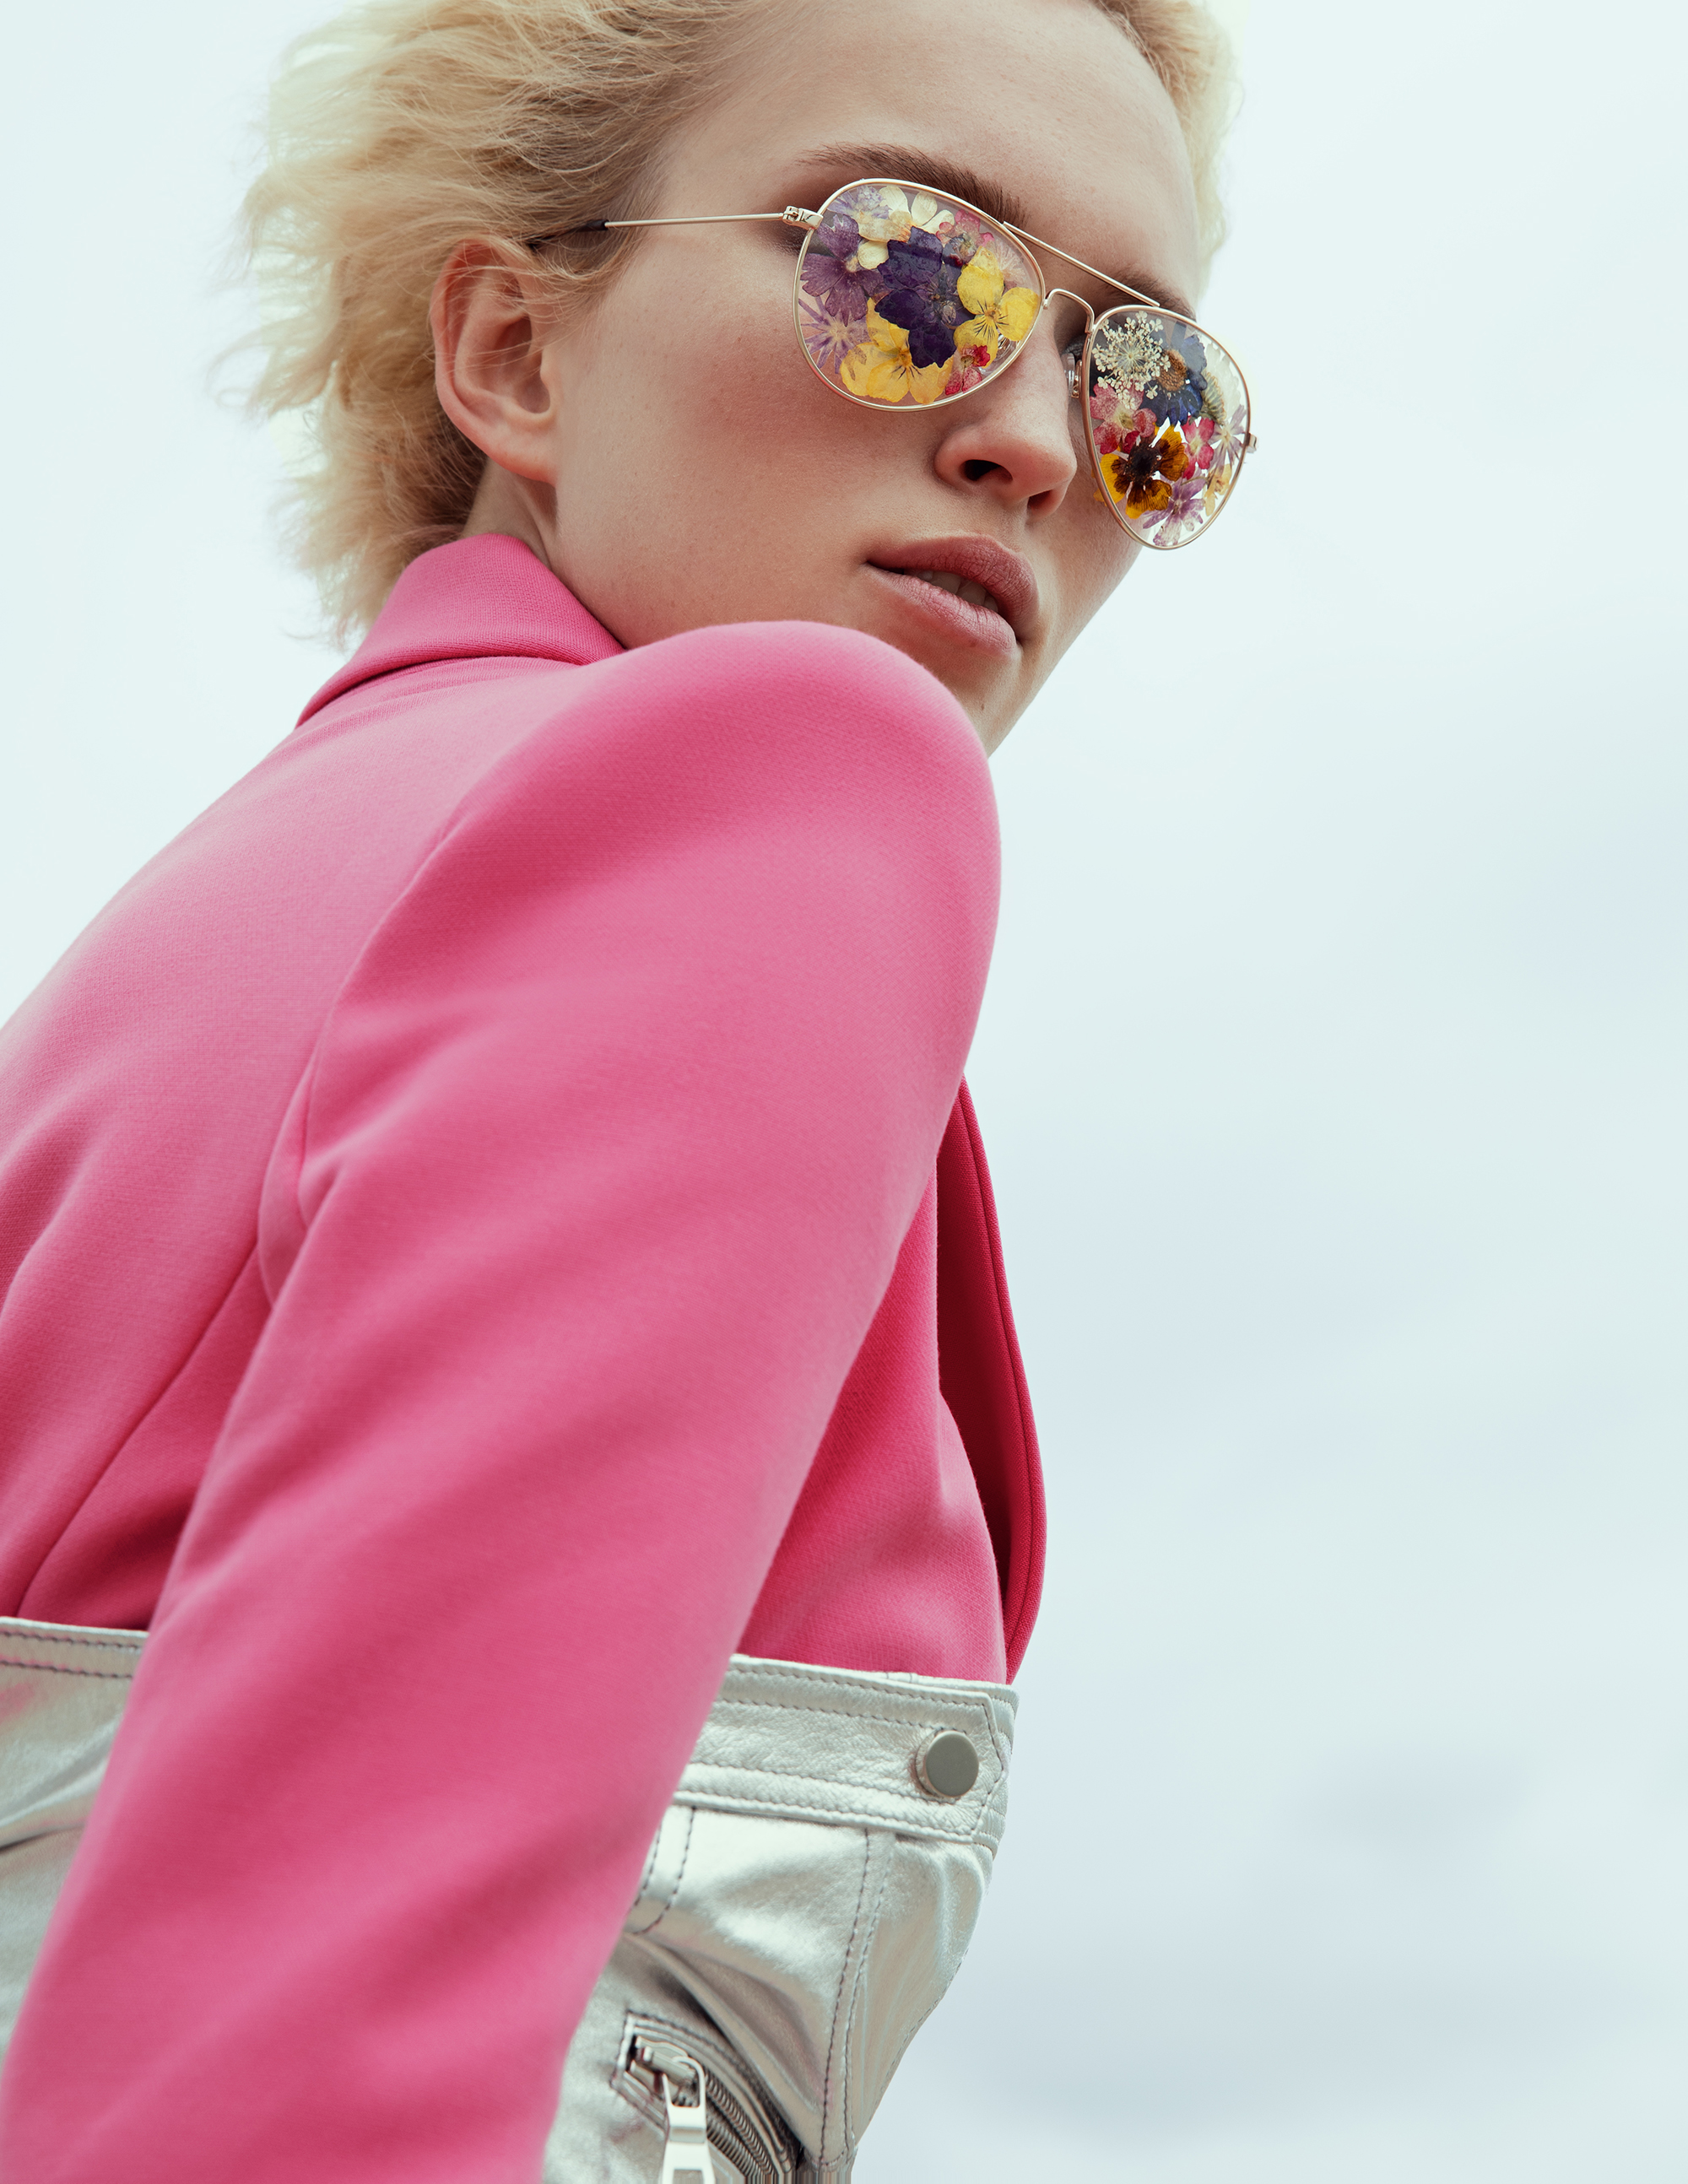 There are flowers everywhere - Editorial by Marina Schneider-Moog